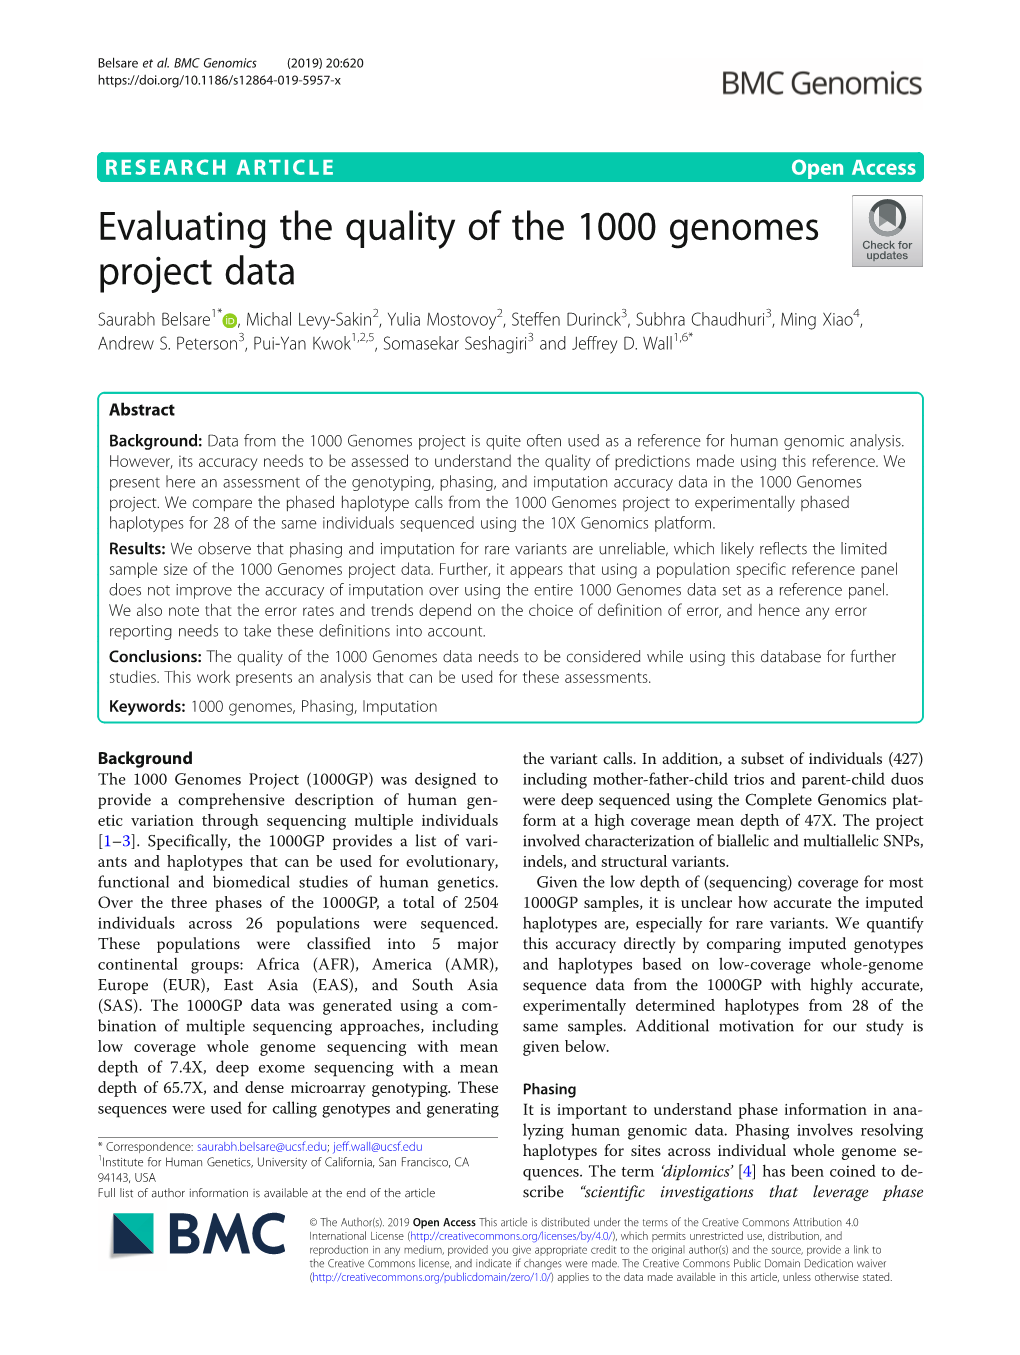 Evaluating the Quality of the 1000 Genomes Project Data